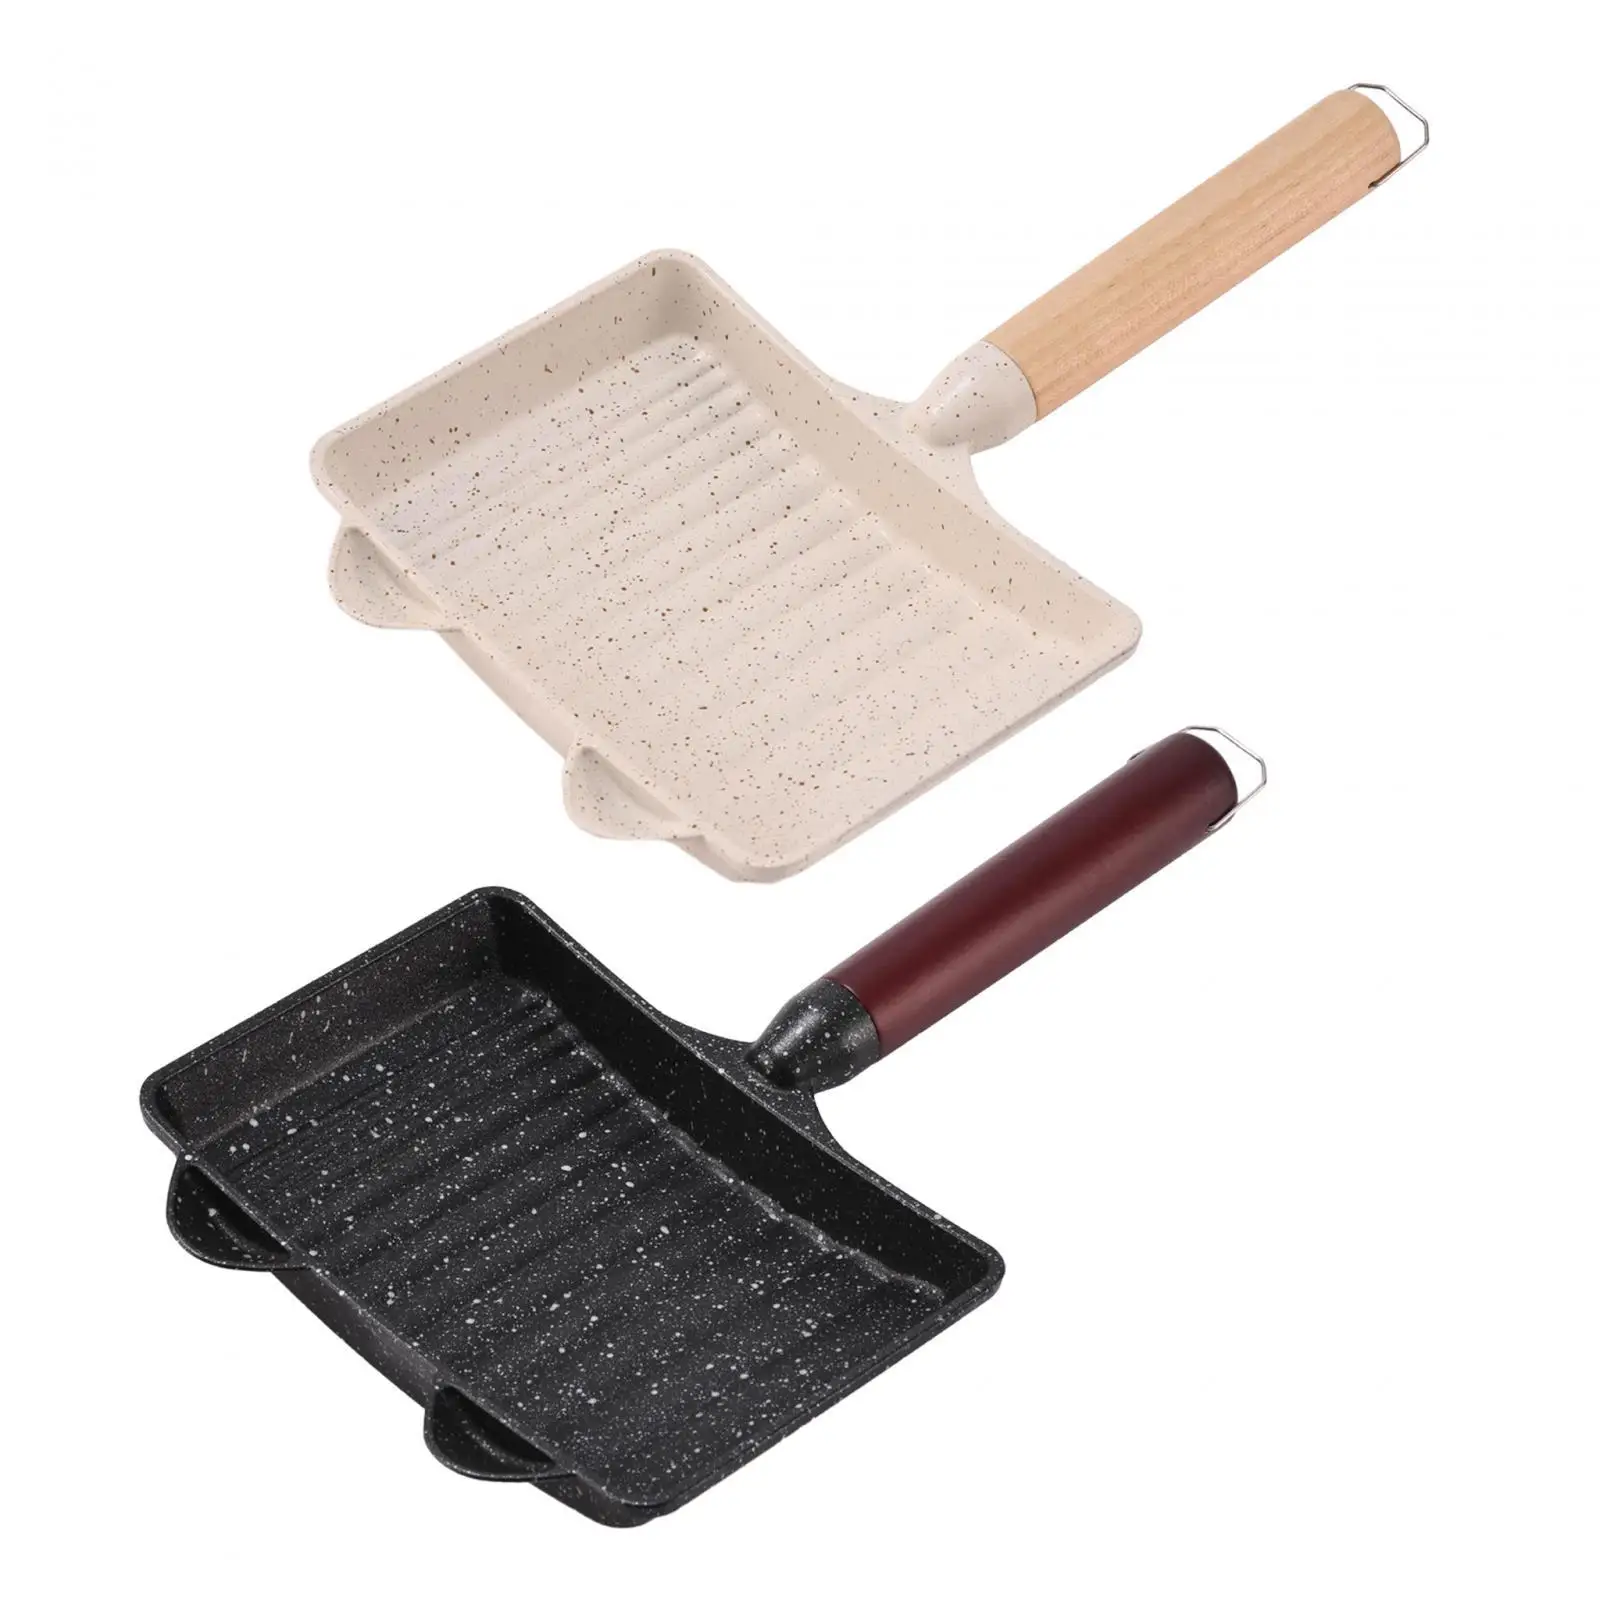 Frying Pan Portable Cooking Supplies Nonstick Pancakes Pans Kitchen Utensils for Camping Party Picnic Household Restaurant